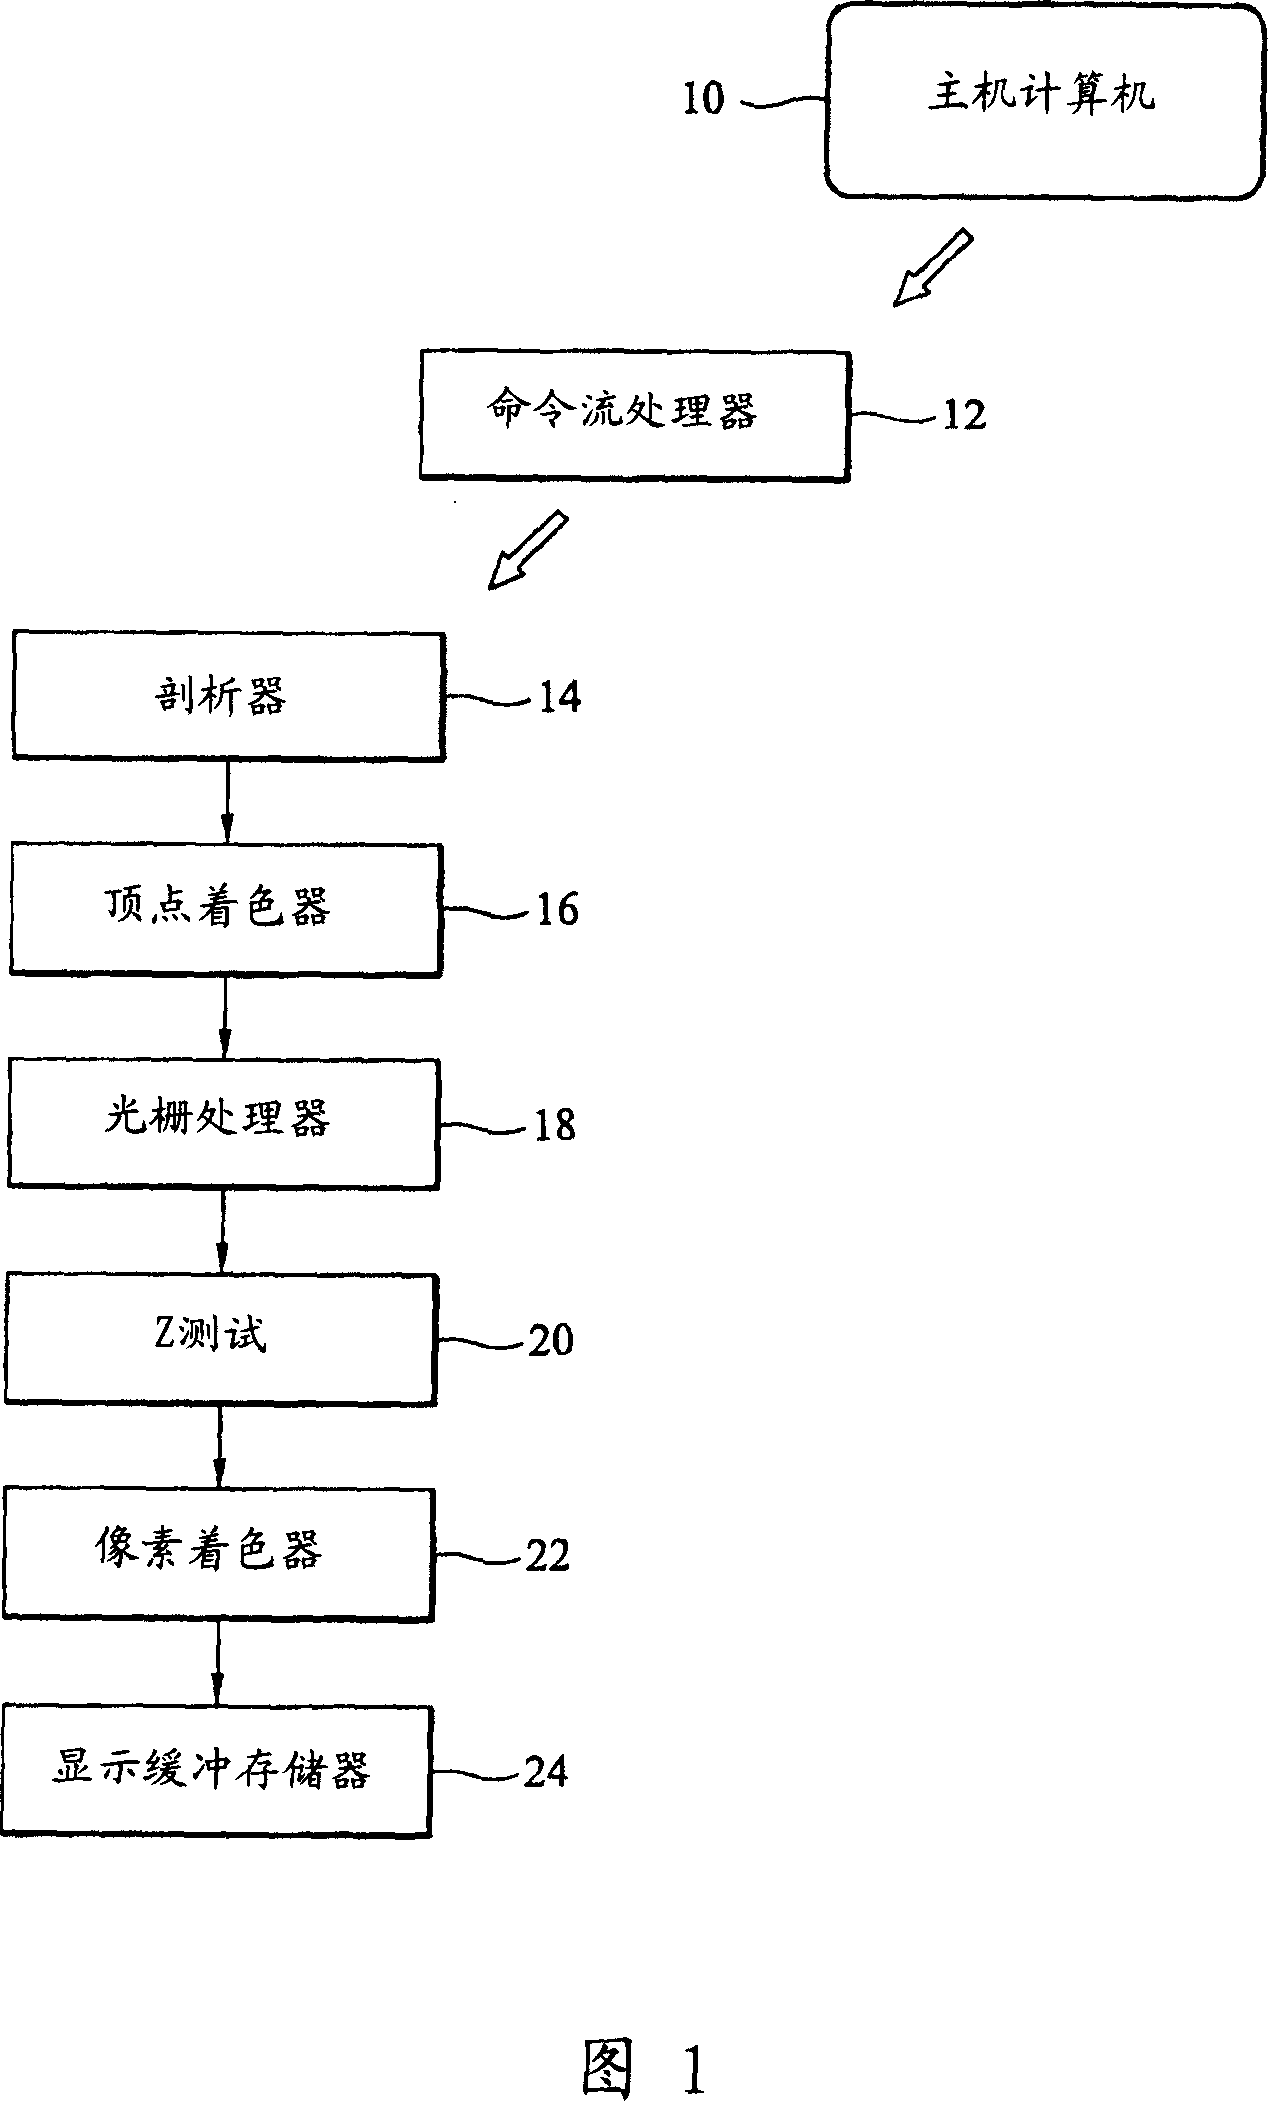 Graphics processing apparatus and method for performing shading operations therein